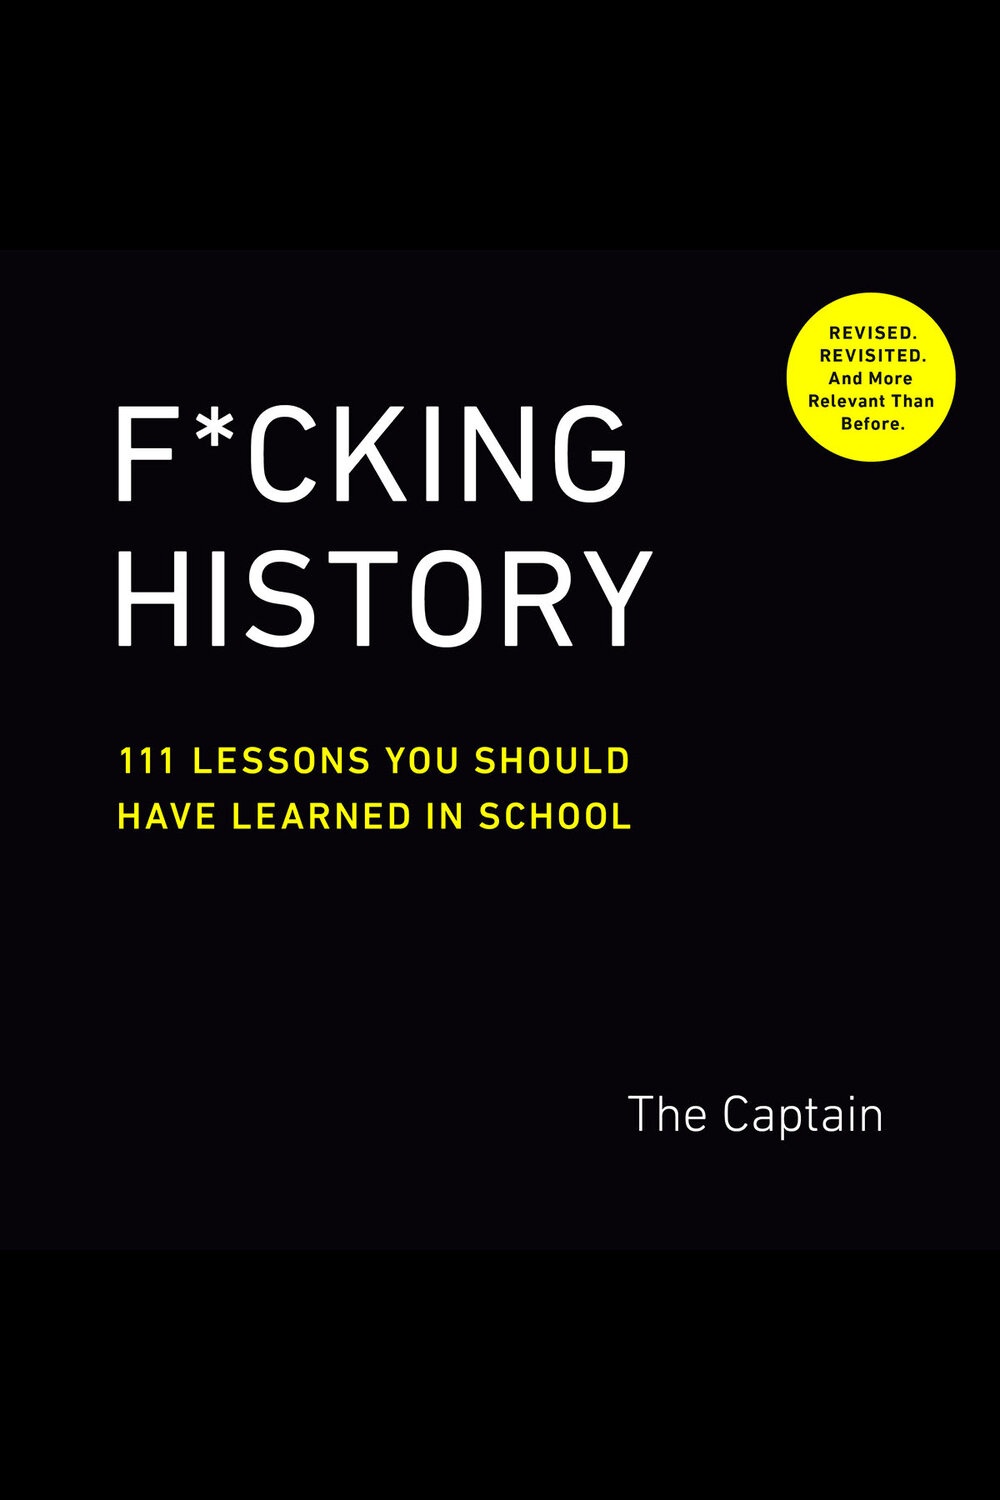 F*ucking History: 111 Lessons You Should Have Learned in School by The Captain